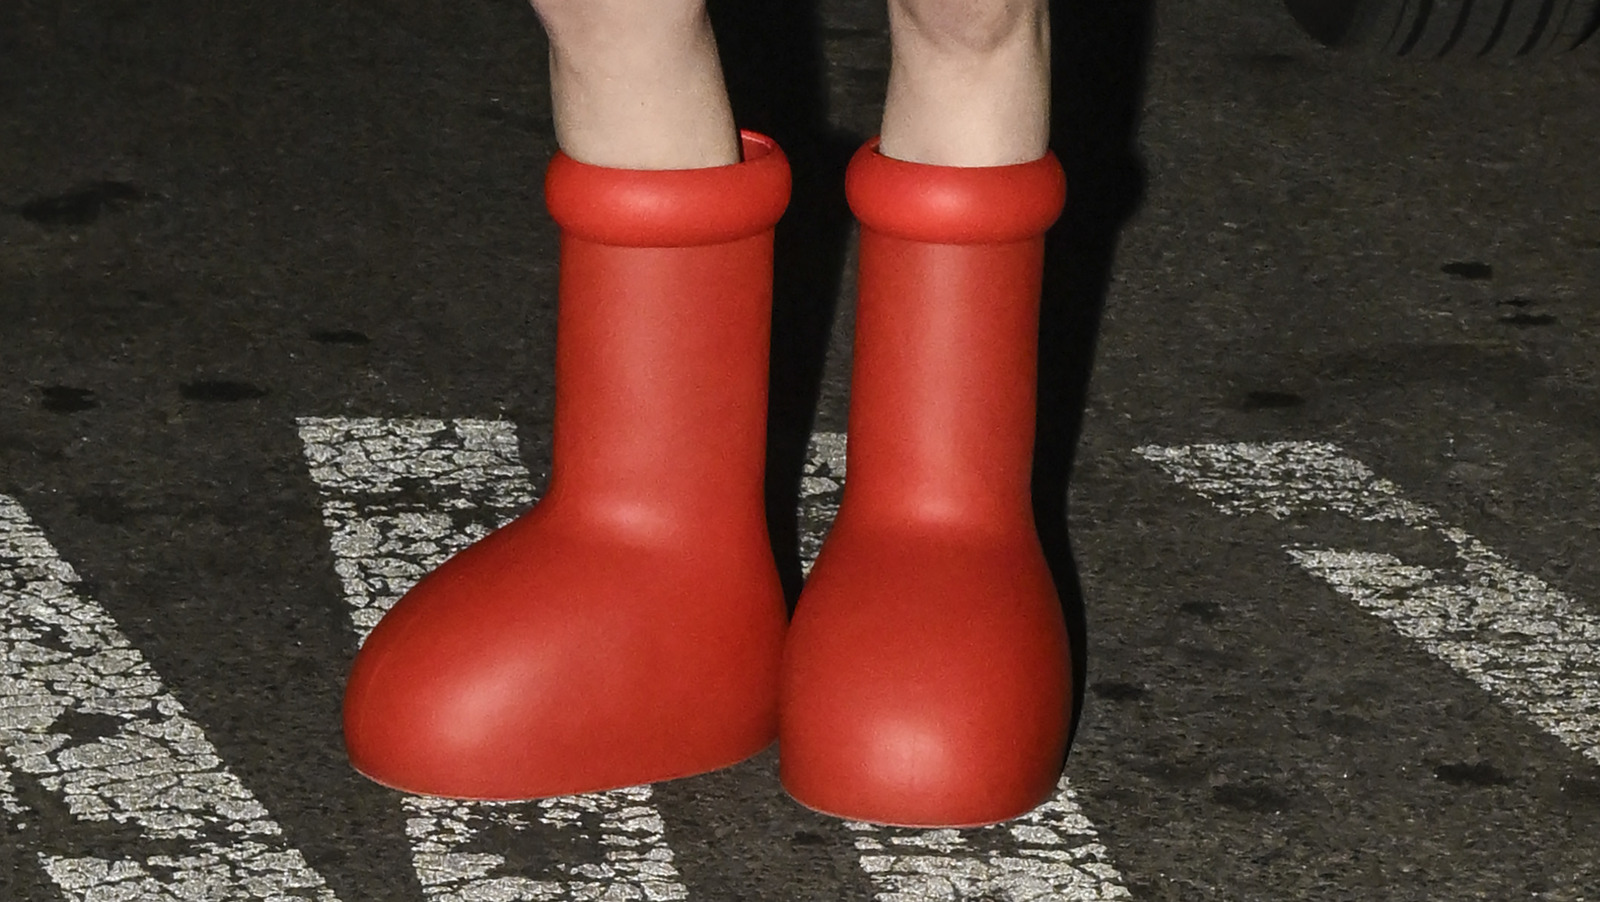 What's With Those Cartoonishly Big Red Rubber Boots Influencers Are Showing  Off On Social Media?